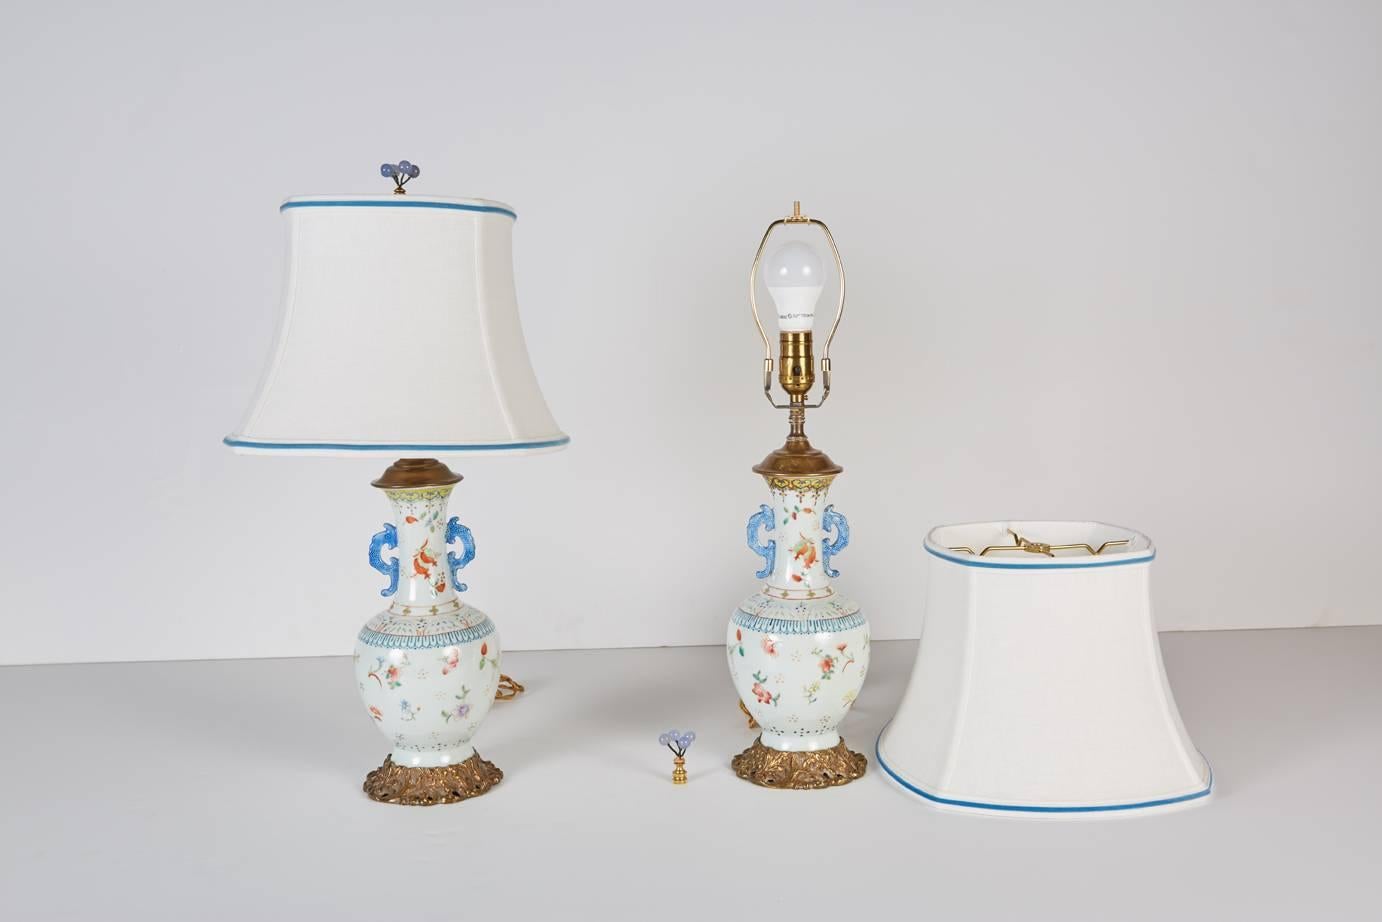 Pair of 19th century Chinese vases resting on later bronze bases with new custom white silk shades trimmed in blue velvet tape and surmounted by blue agate finials.